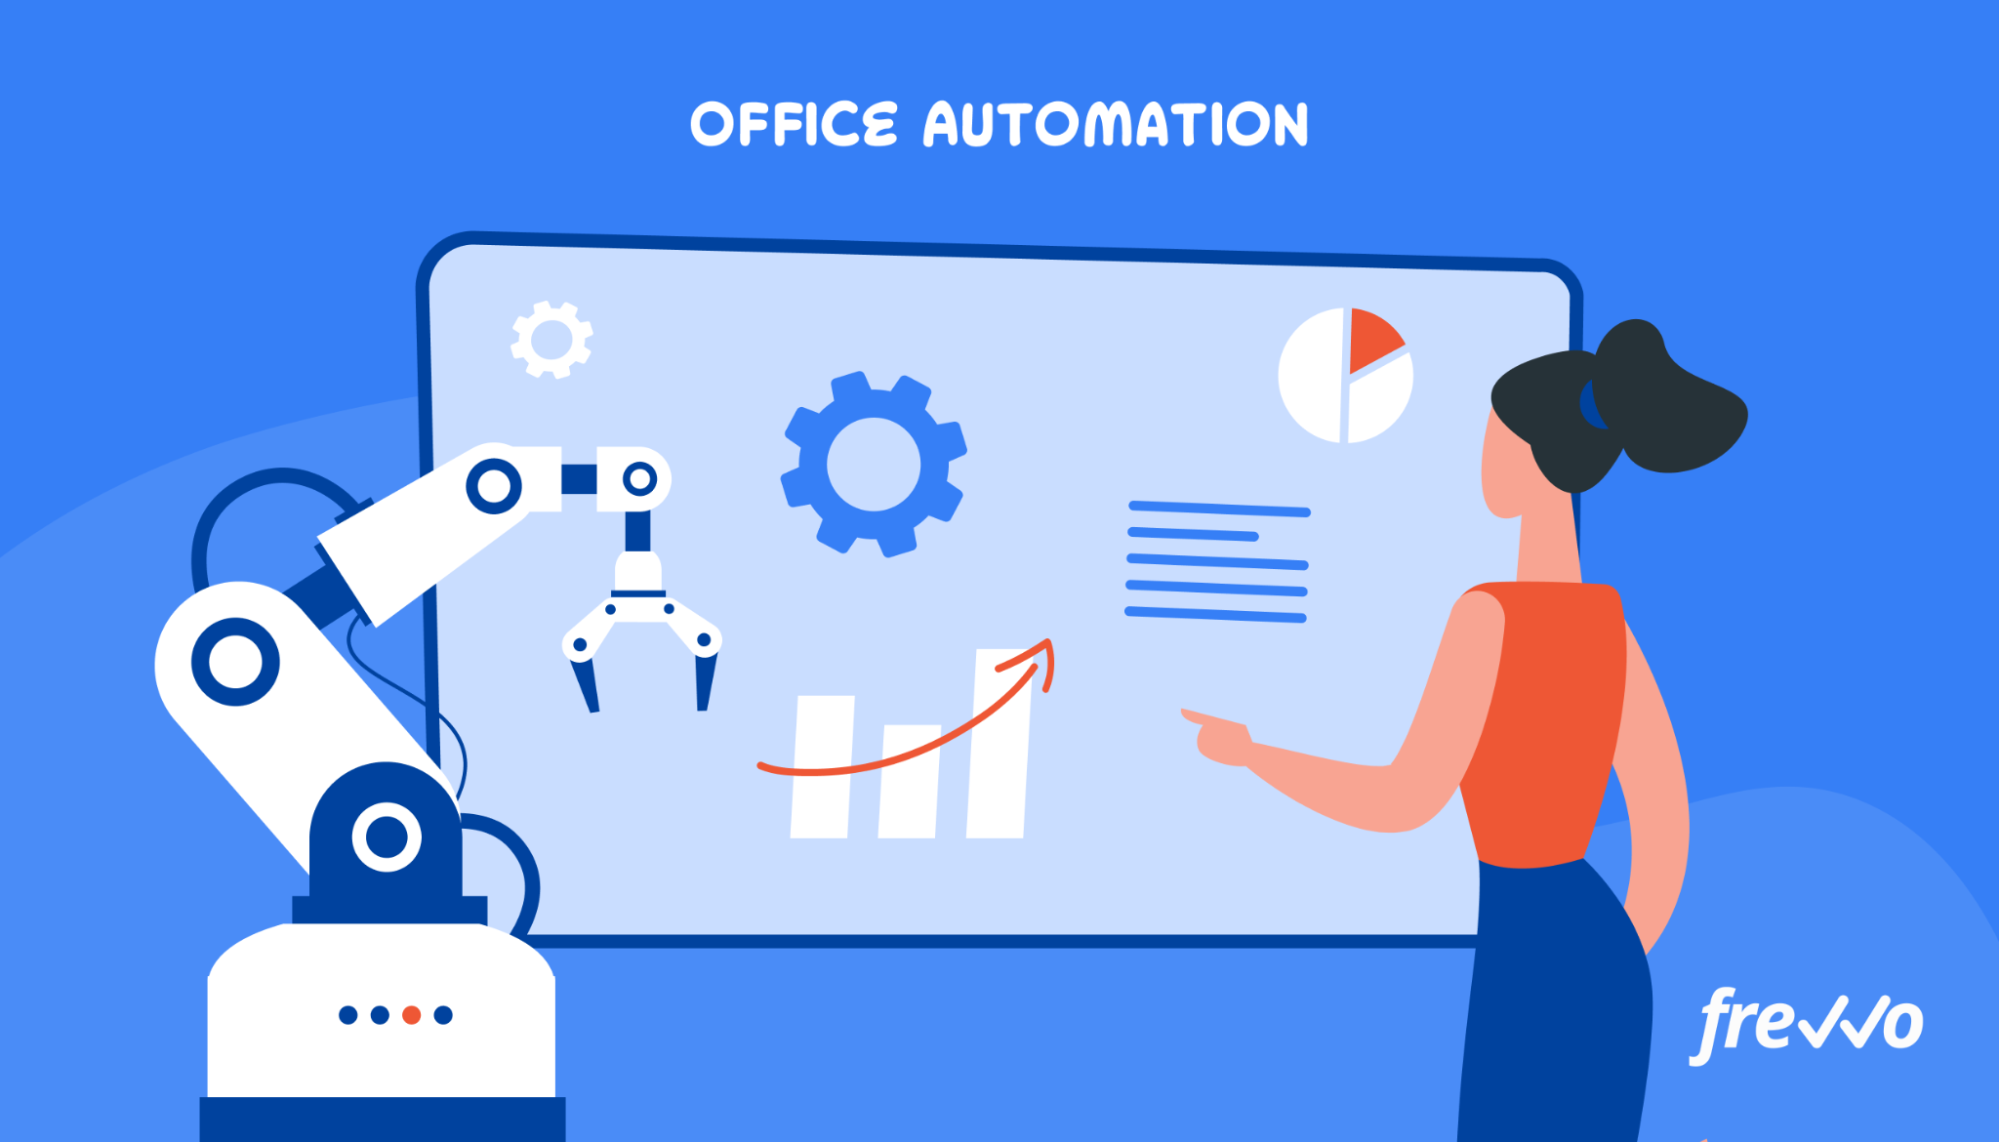 Automating office processes